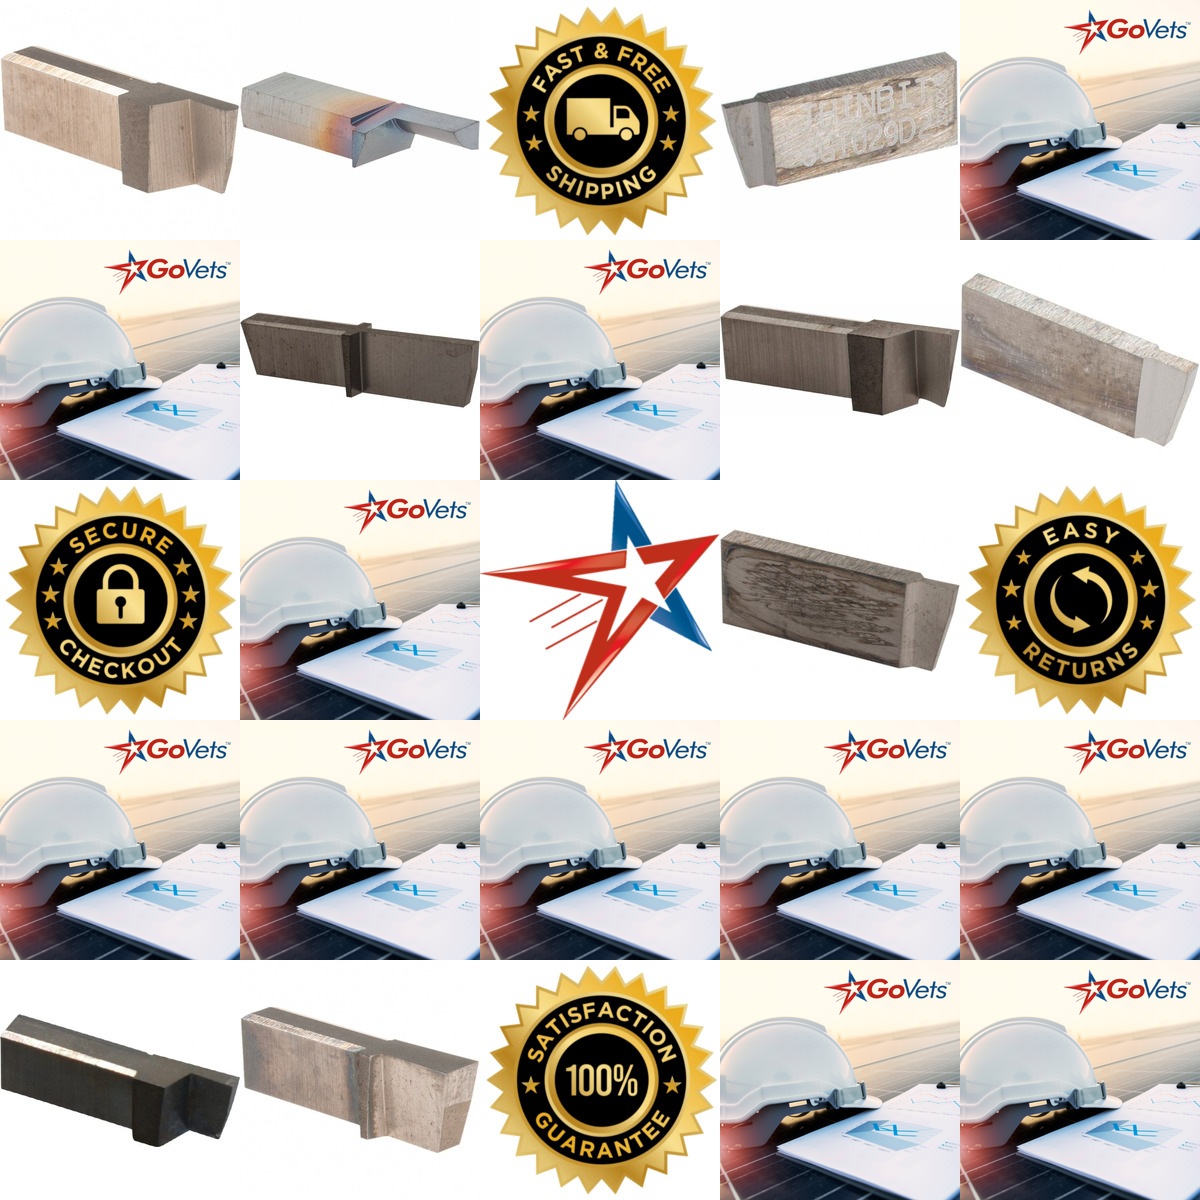 A selection of Thin Bit products on GoVets